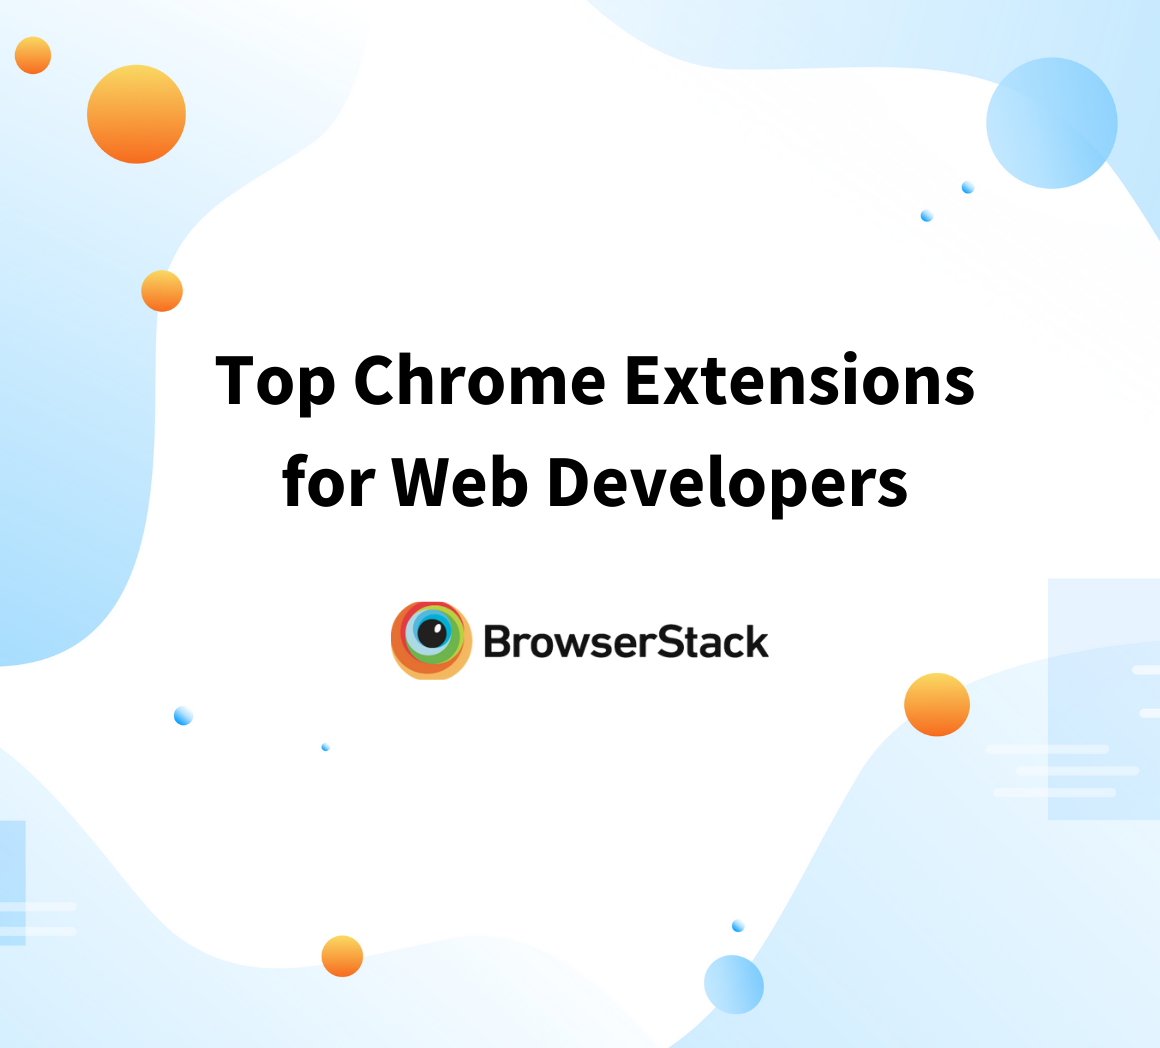 Top Chrome Extensions for Web Developers